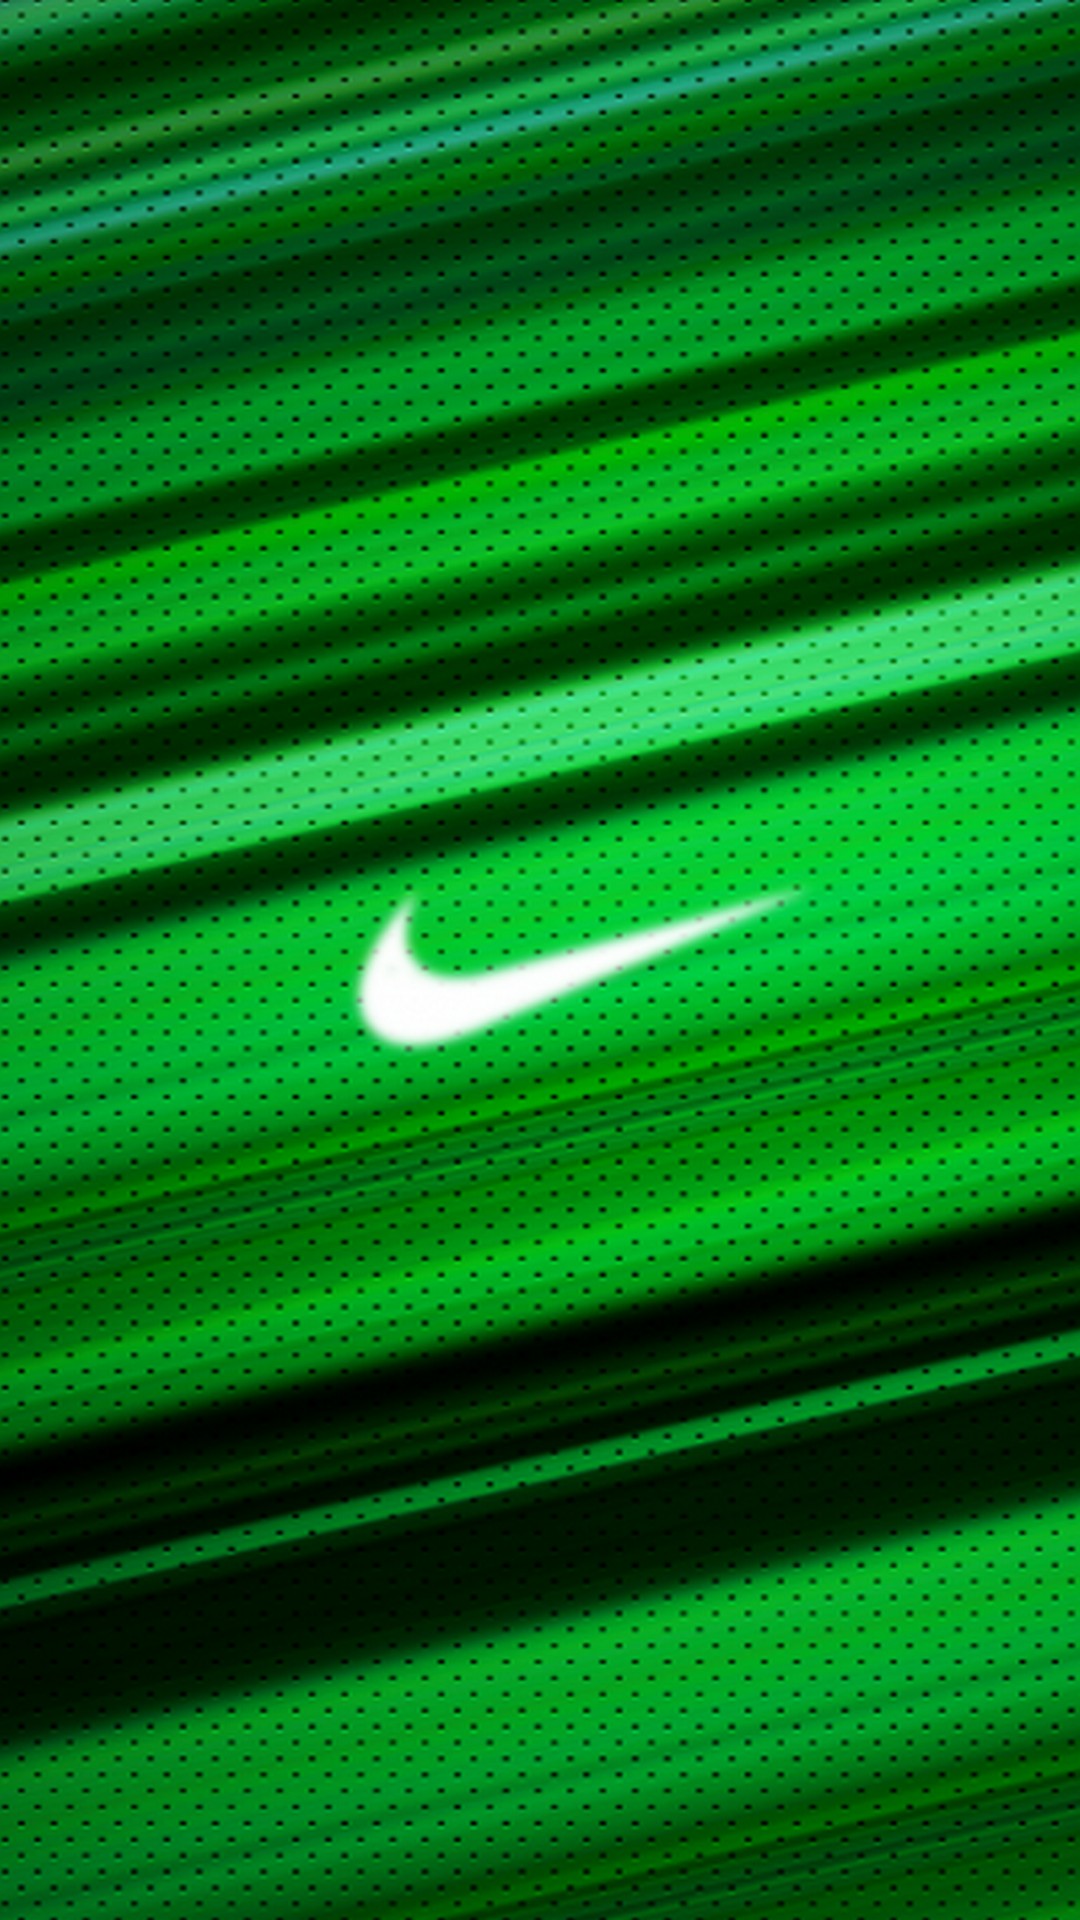 Android Wallpaper HD Neon Green with resolution 1080X1920 pixel. You can make this wallpaper for your Android backgrounds, Tablet, Smartphones Screensavers and Mobile Phone Lock Screen